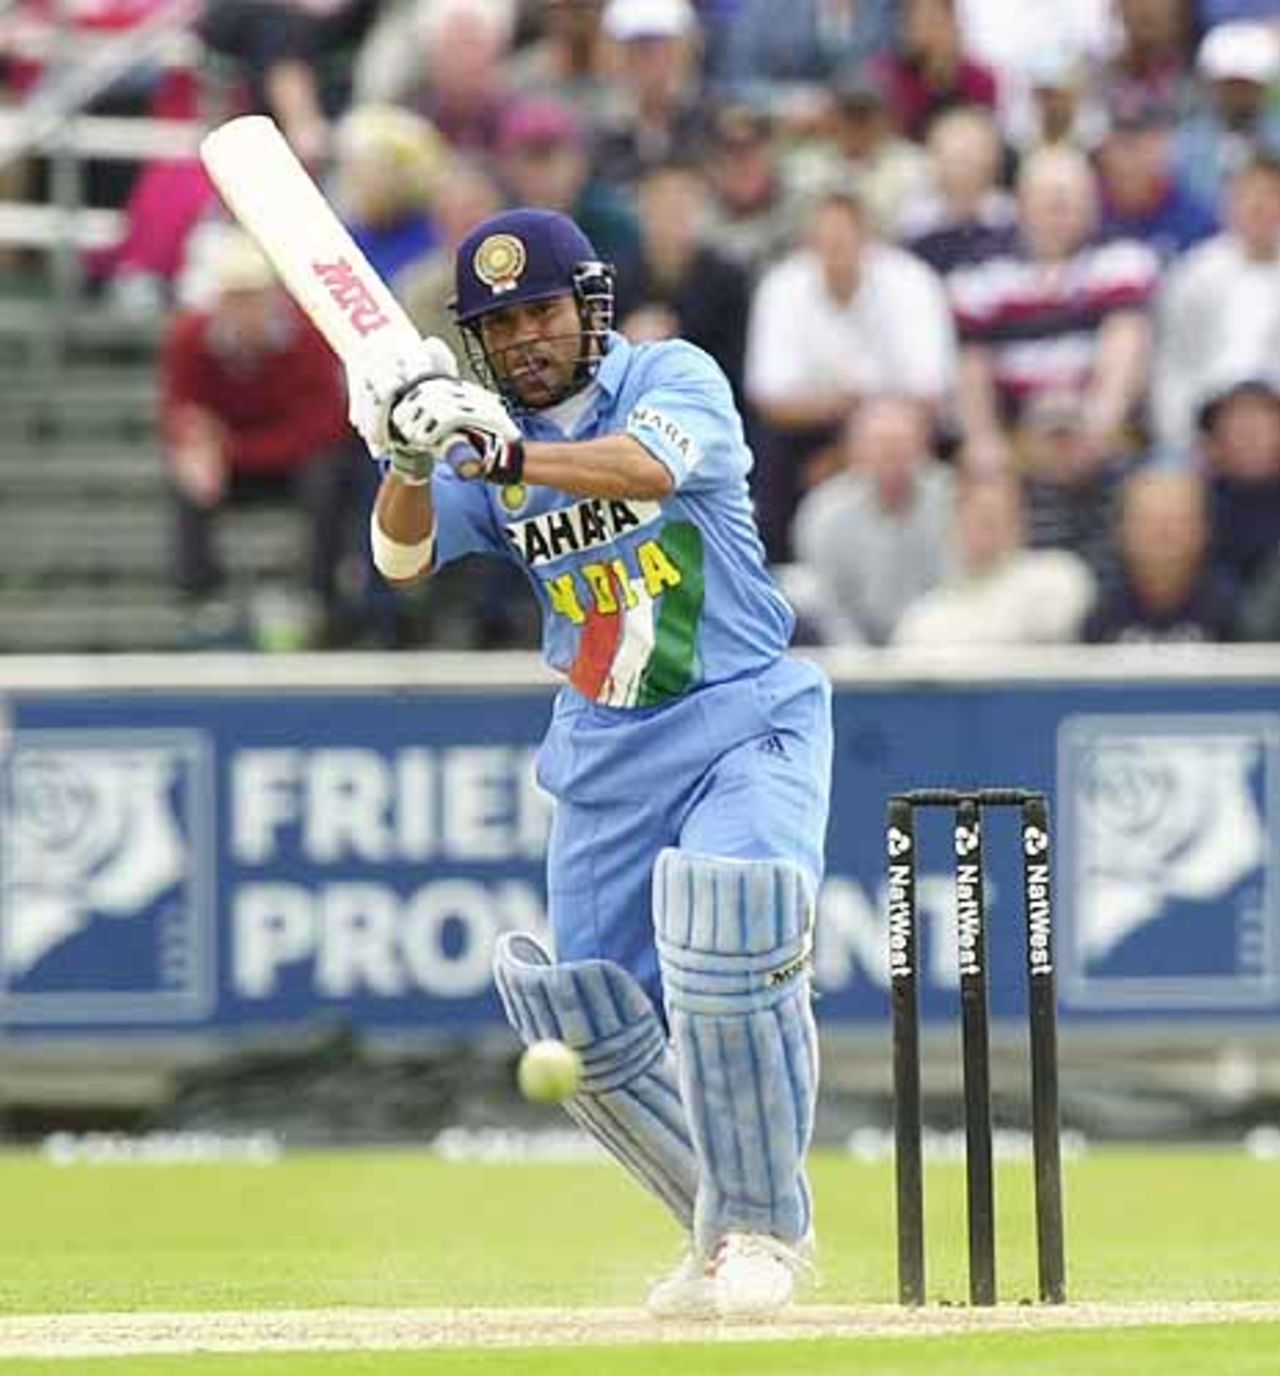 Rapt in concentration, Tendulkar flicks a ball to leg, England v India at Chester-le-Street, July 2002